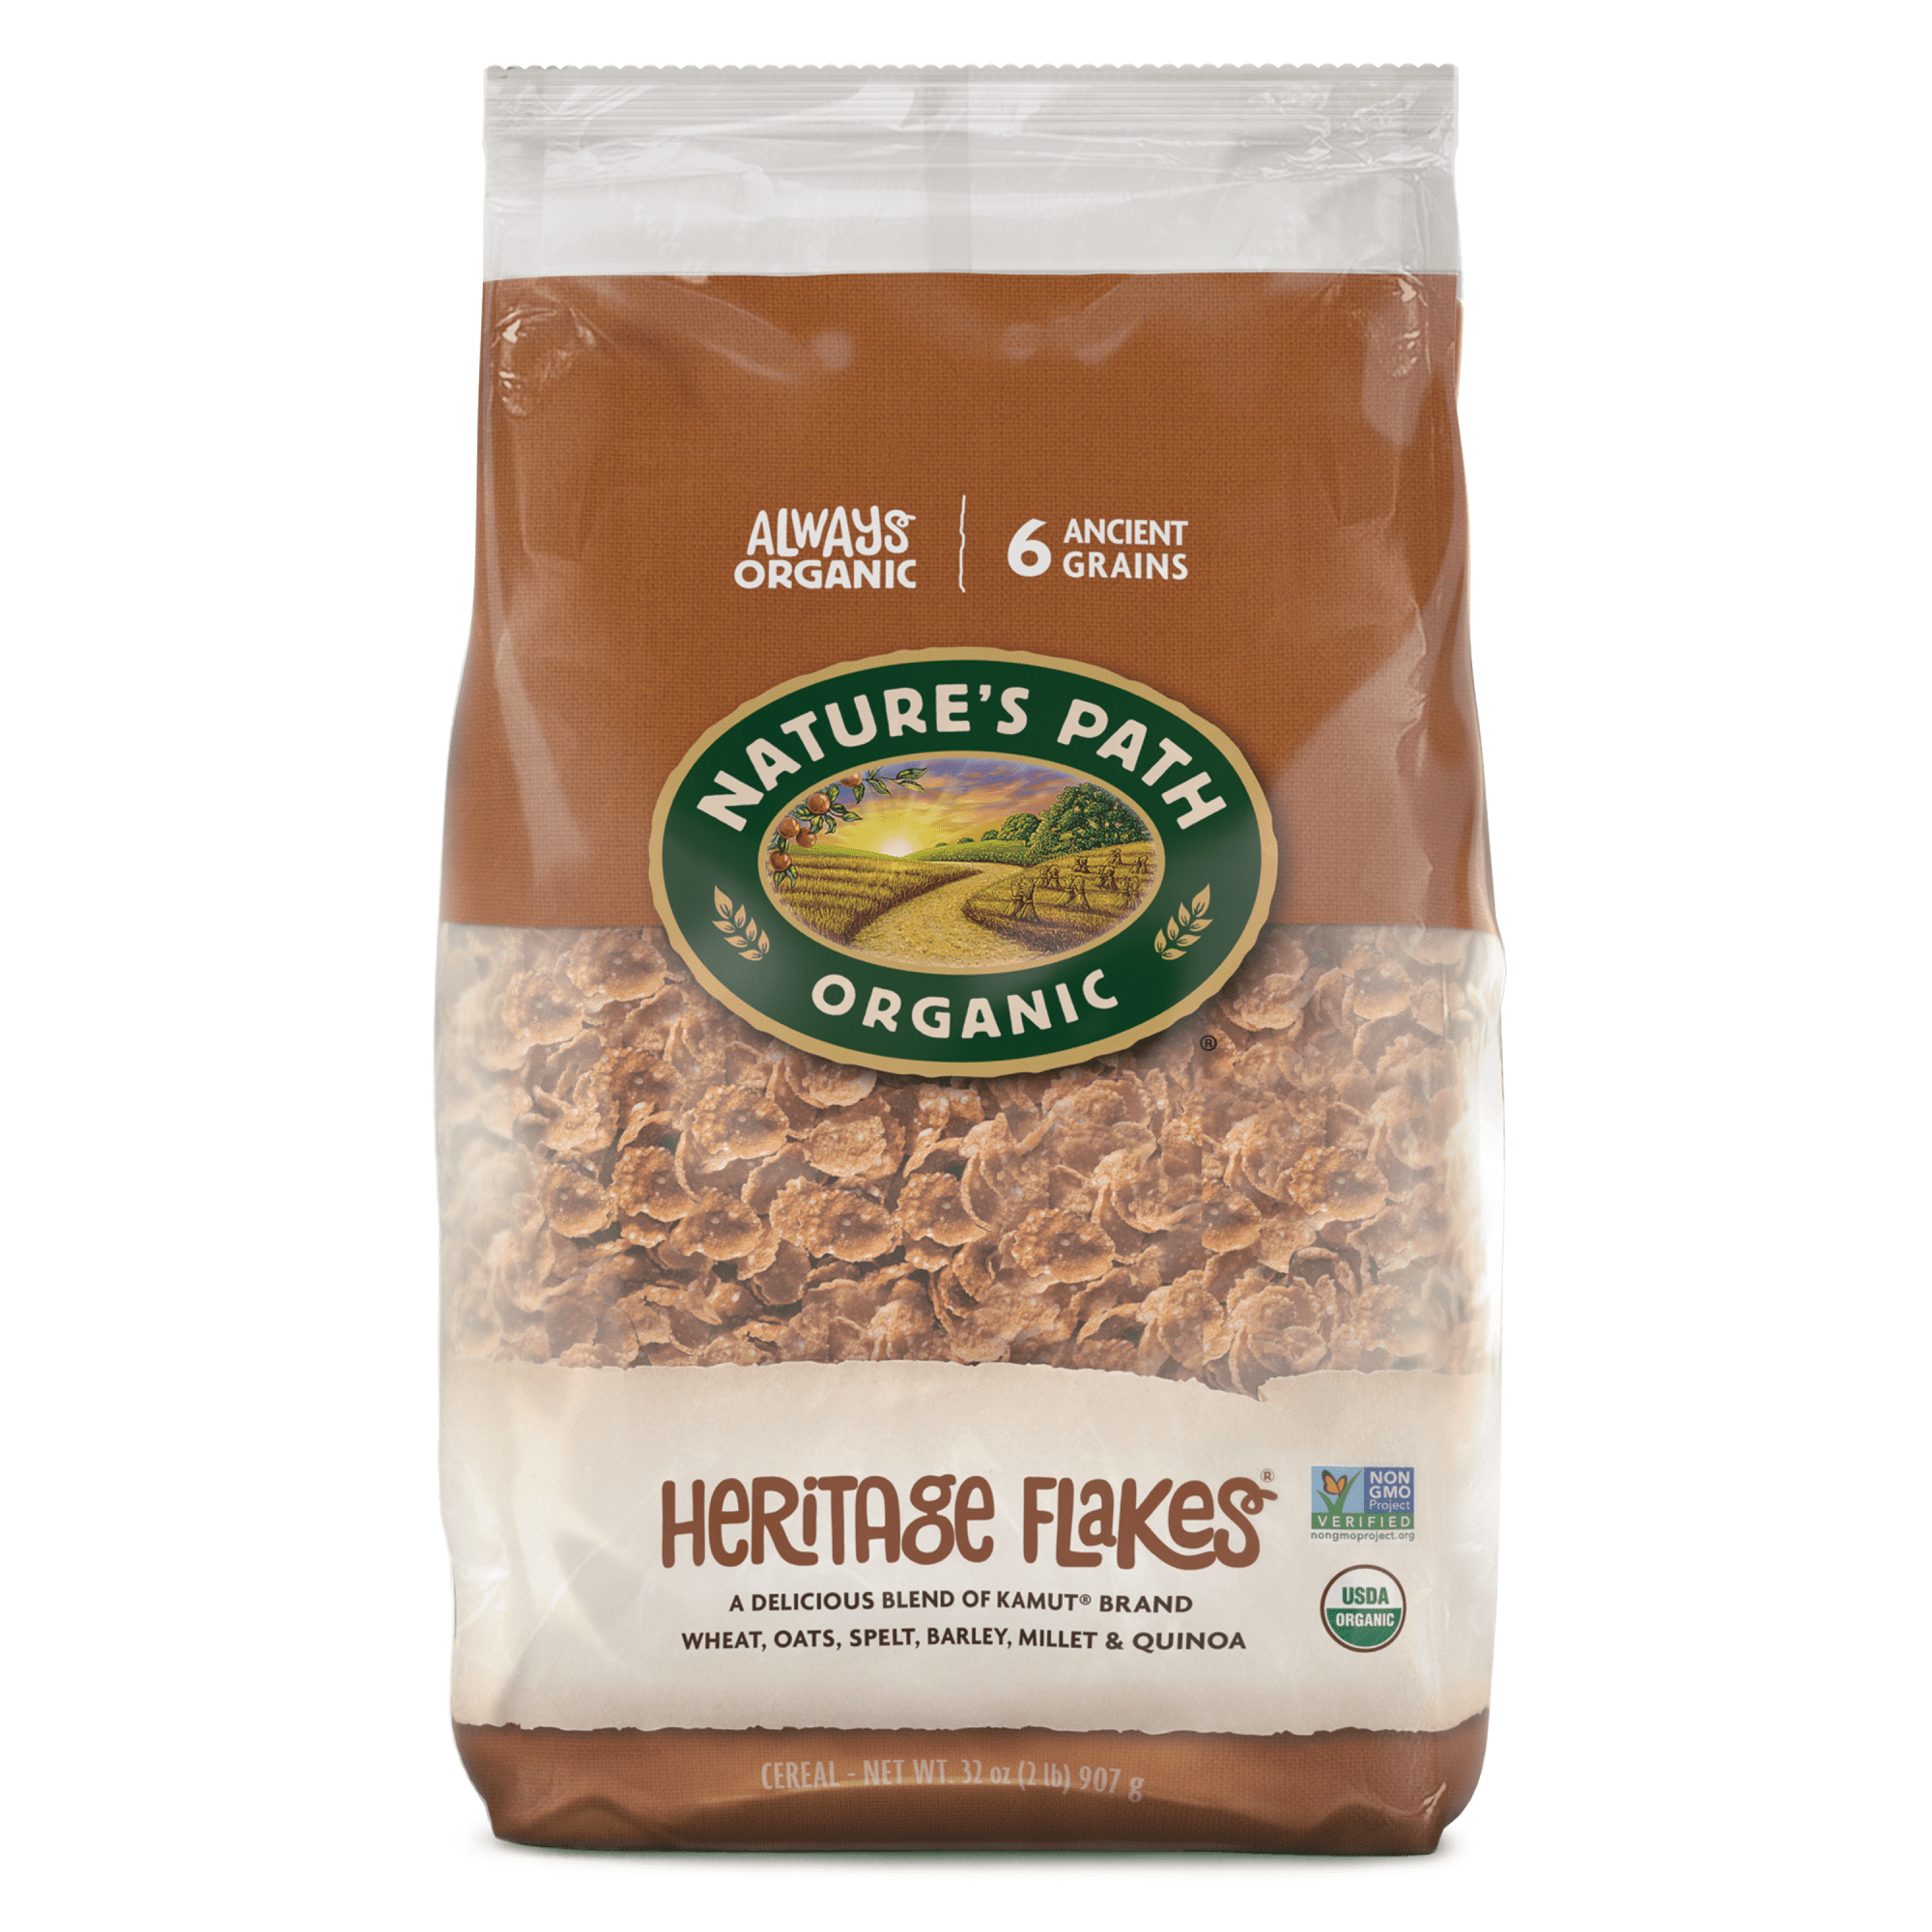 Nature's Path Organic Heritage Flakes Cereal, 32 oz Bag